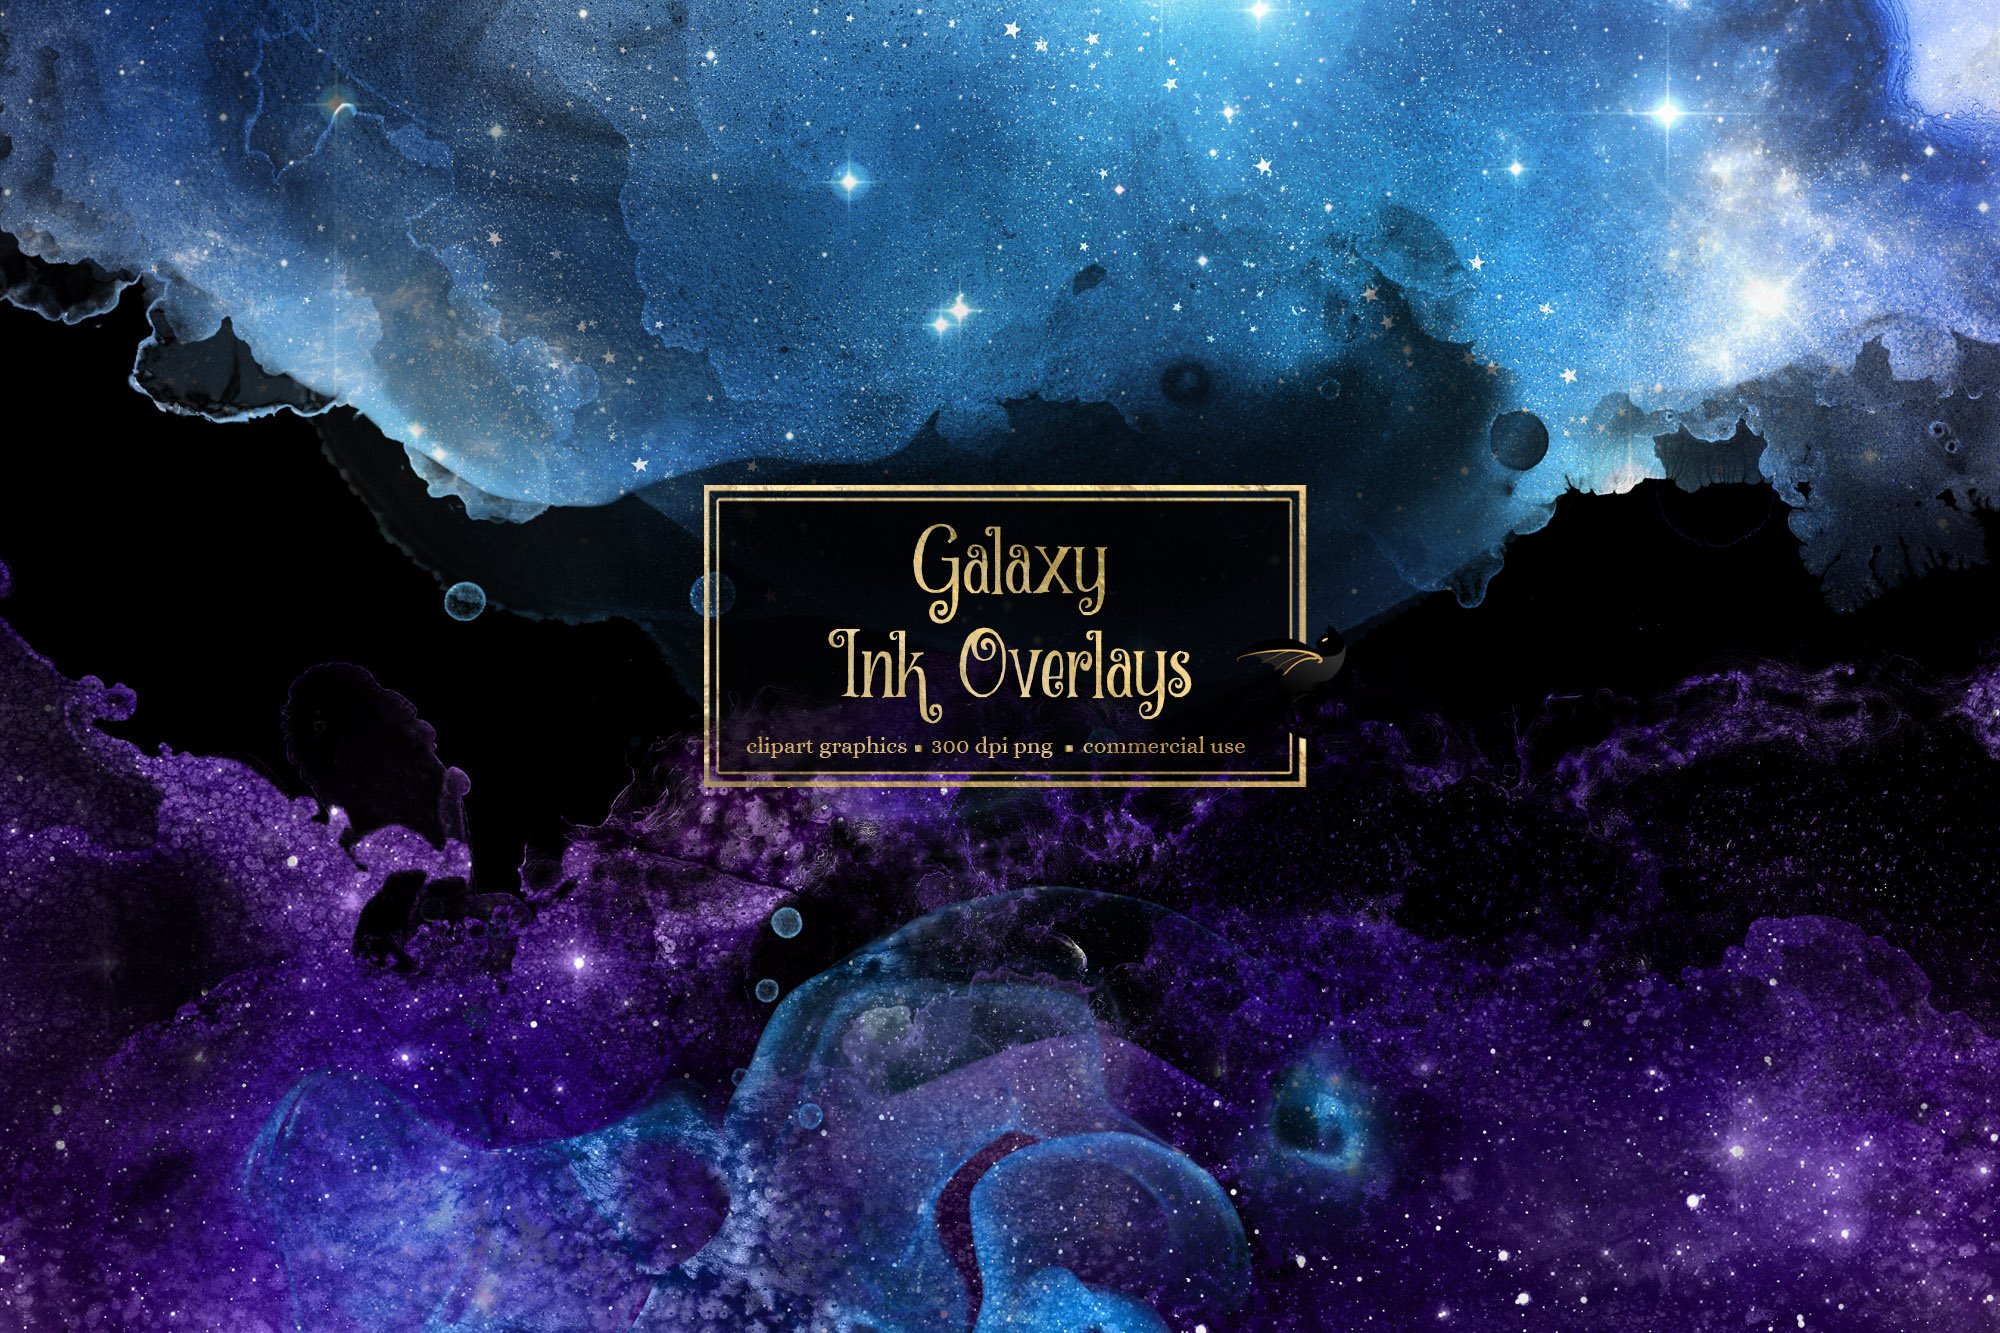 Galaxy Ink Overlays cover image.